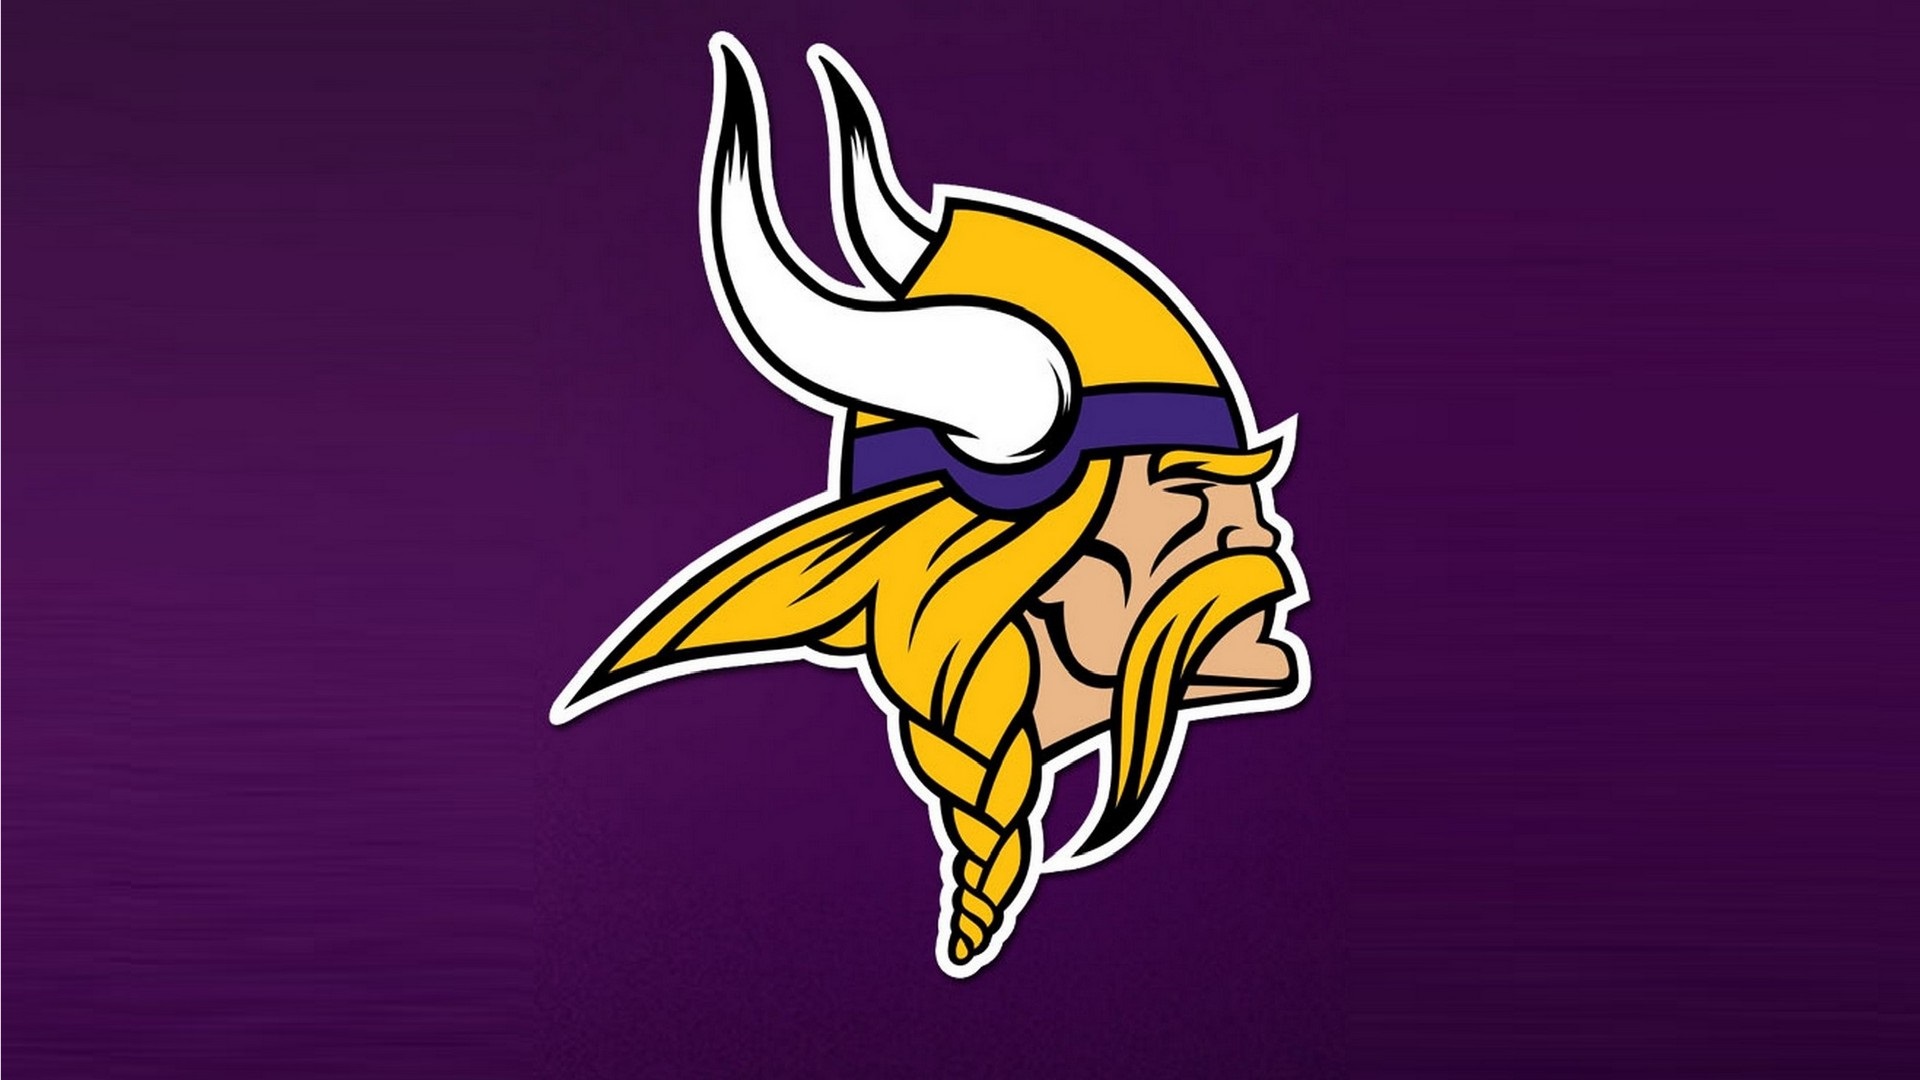 Minnesota Vikings Desktop Backgrounds With high-resolution 1920X1080 pixel. Download and set as wallpaper for Desktop Computer, Apple iPhone X, XS Max, XR, 8, 7, 6, SE, iPad, Android